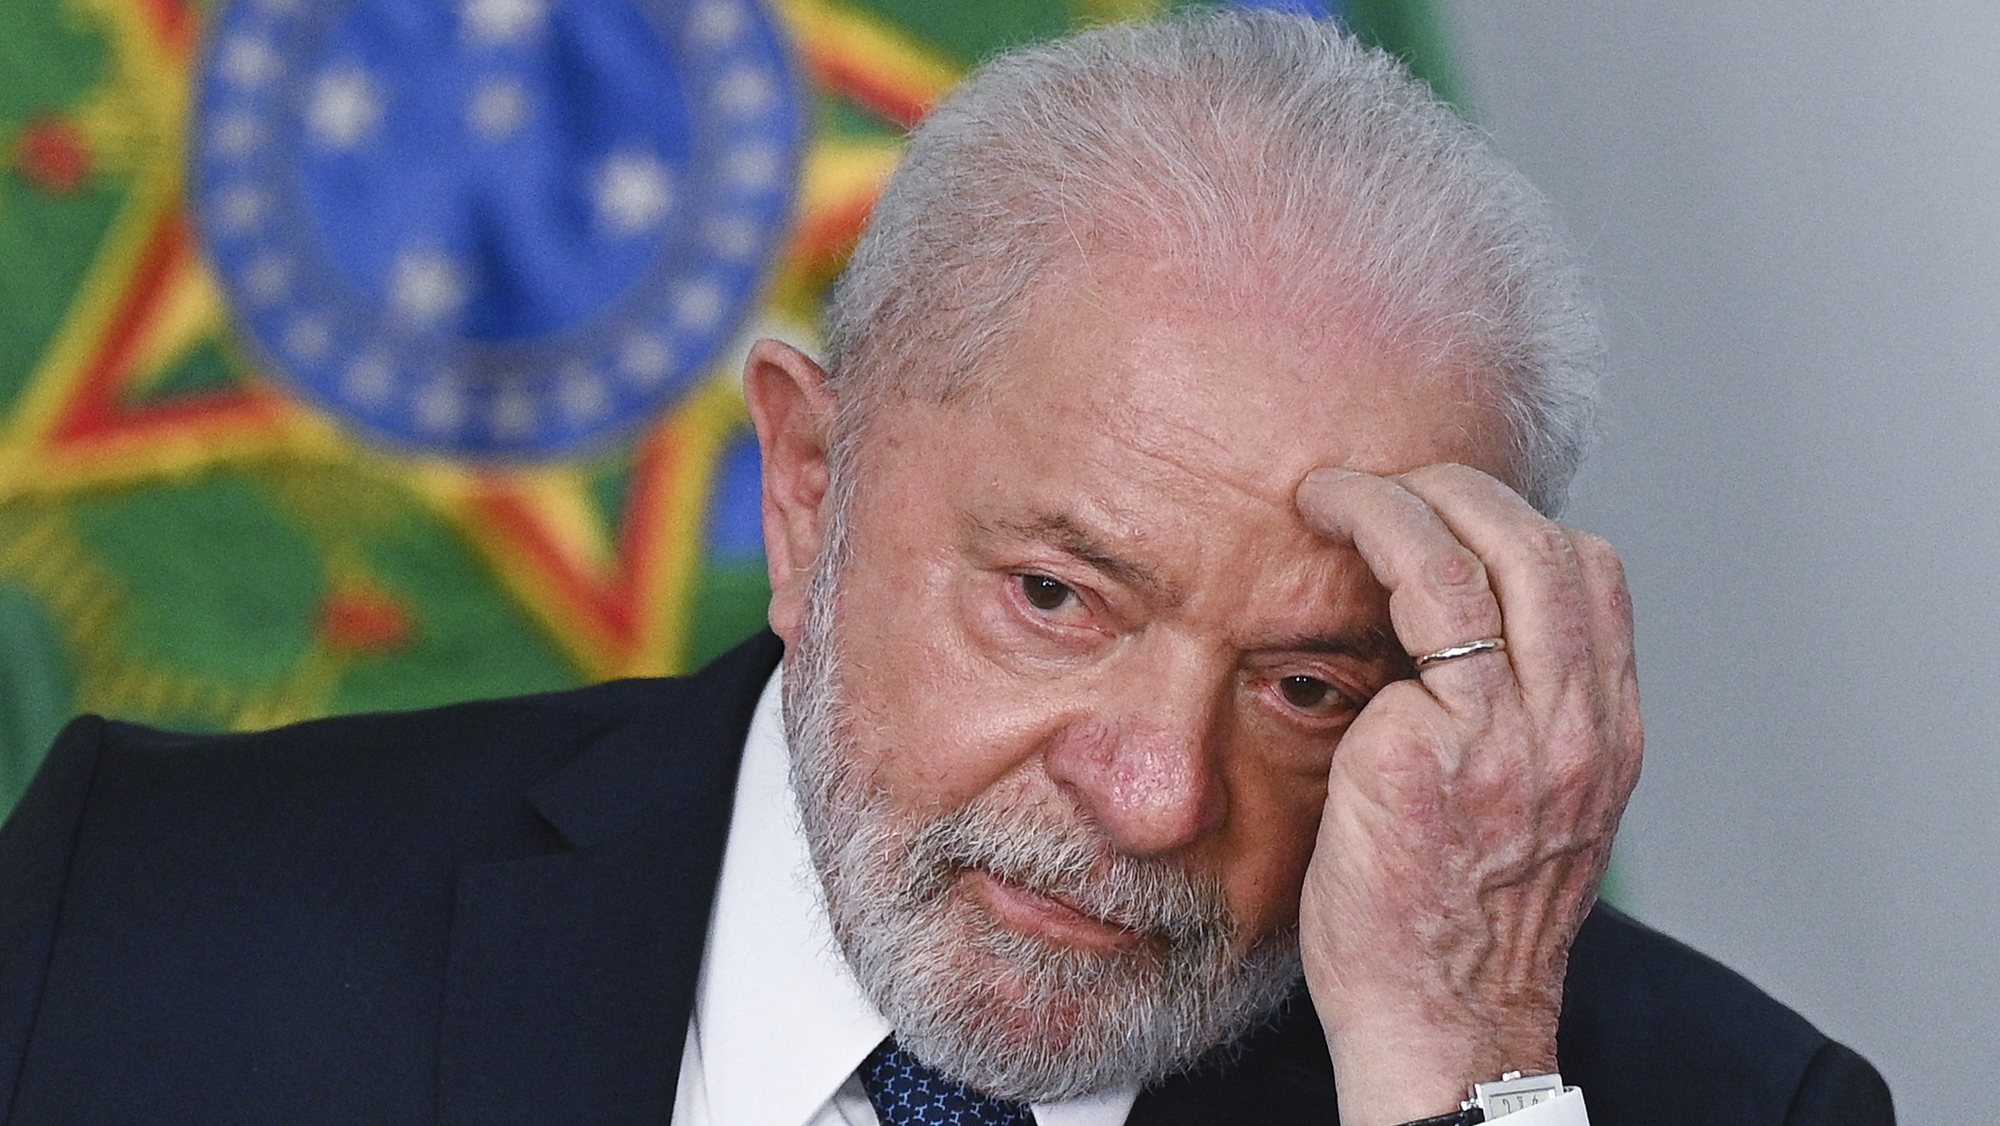 epa10653619 Brazil&#039;s President Luiz Inacio Lula da Silva reacts during a meeting with representatives of the automotive sector, at the Planalto Palace in Brasilia, Brazil, 25 May 2023. The Brazilian government will reduce the tax burden on cars worth less than 120,000 Brazilian real (about 24,000 US dollar) by up to 10.79 percent to try to make them cheaper and boost the sector, Vice President Geraldo Alckmin announced on 25 May. The announcement was made after a meeting led by the Brazilian president, Luiz Inacio Lula da Silva, with the representatives of the automotive sector and with the unions of the sector, to seek incentives that promote this industry and make vehicles more accessible for the population.  EPA/ANDRE BORGES